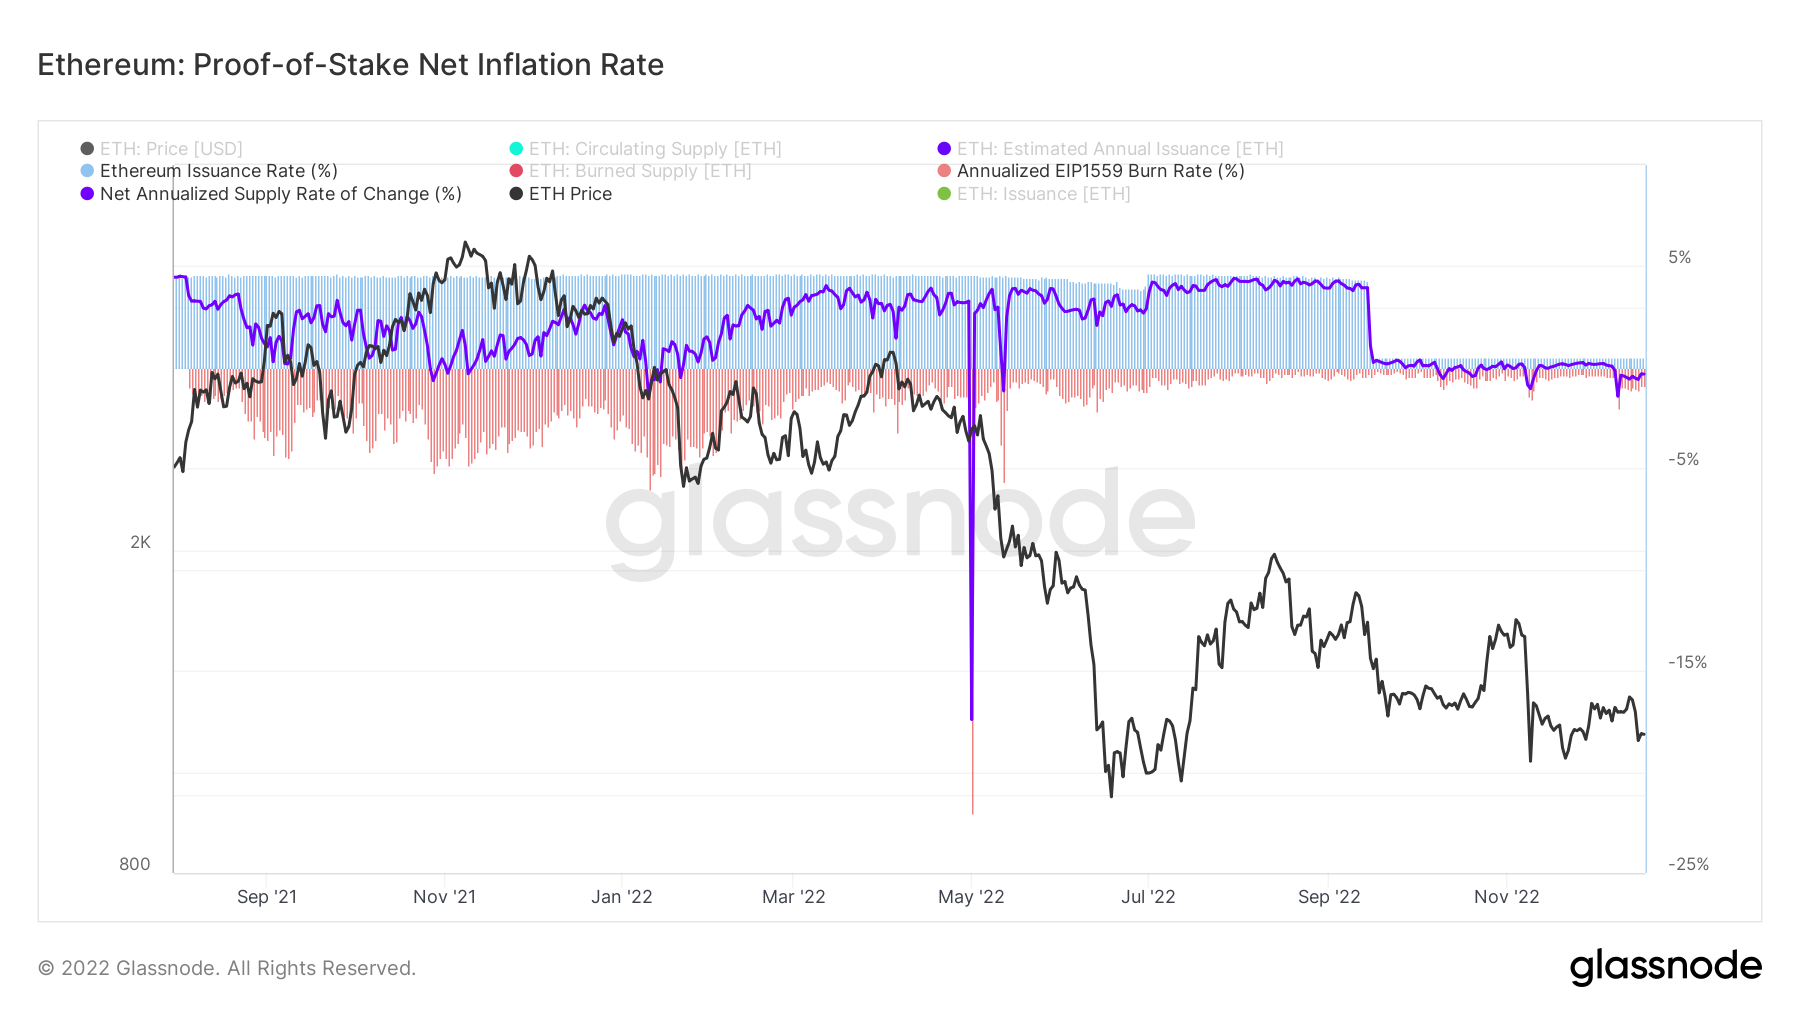 Ethereum: Proof of Stake Net Inflation Rate